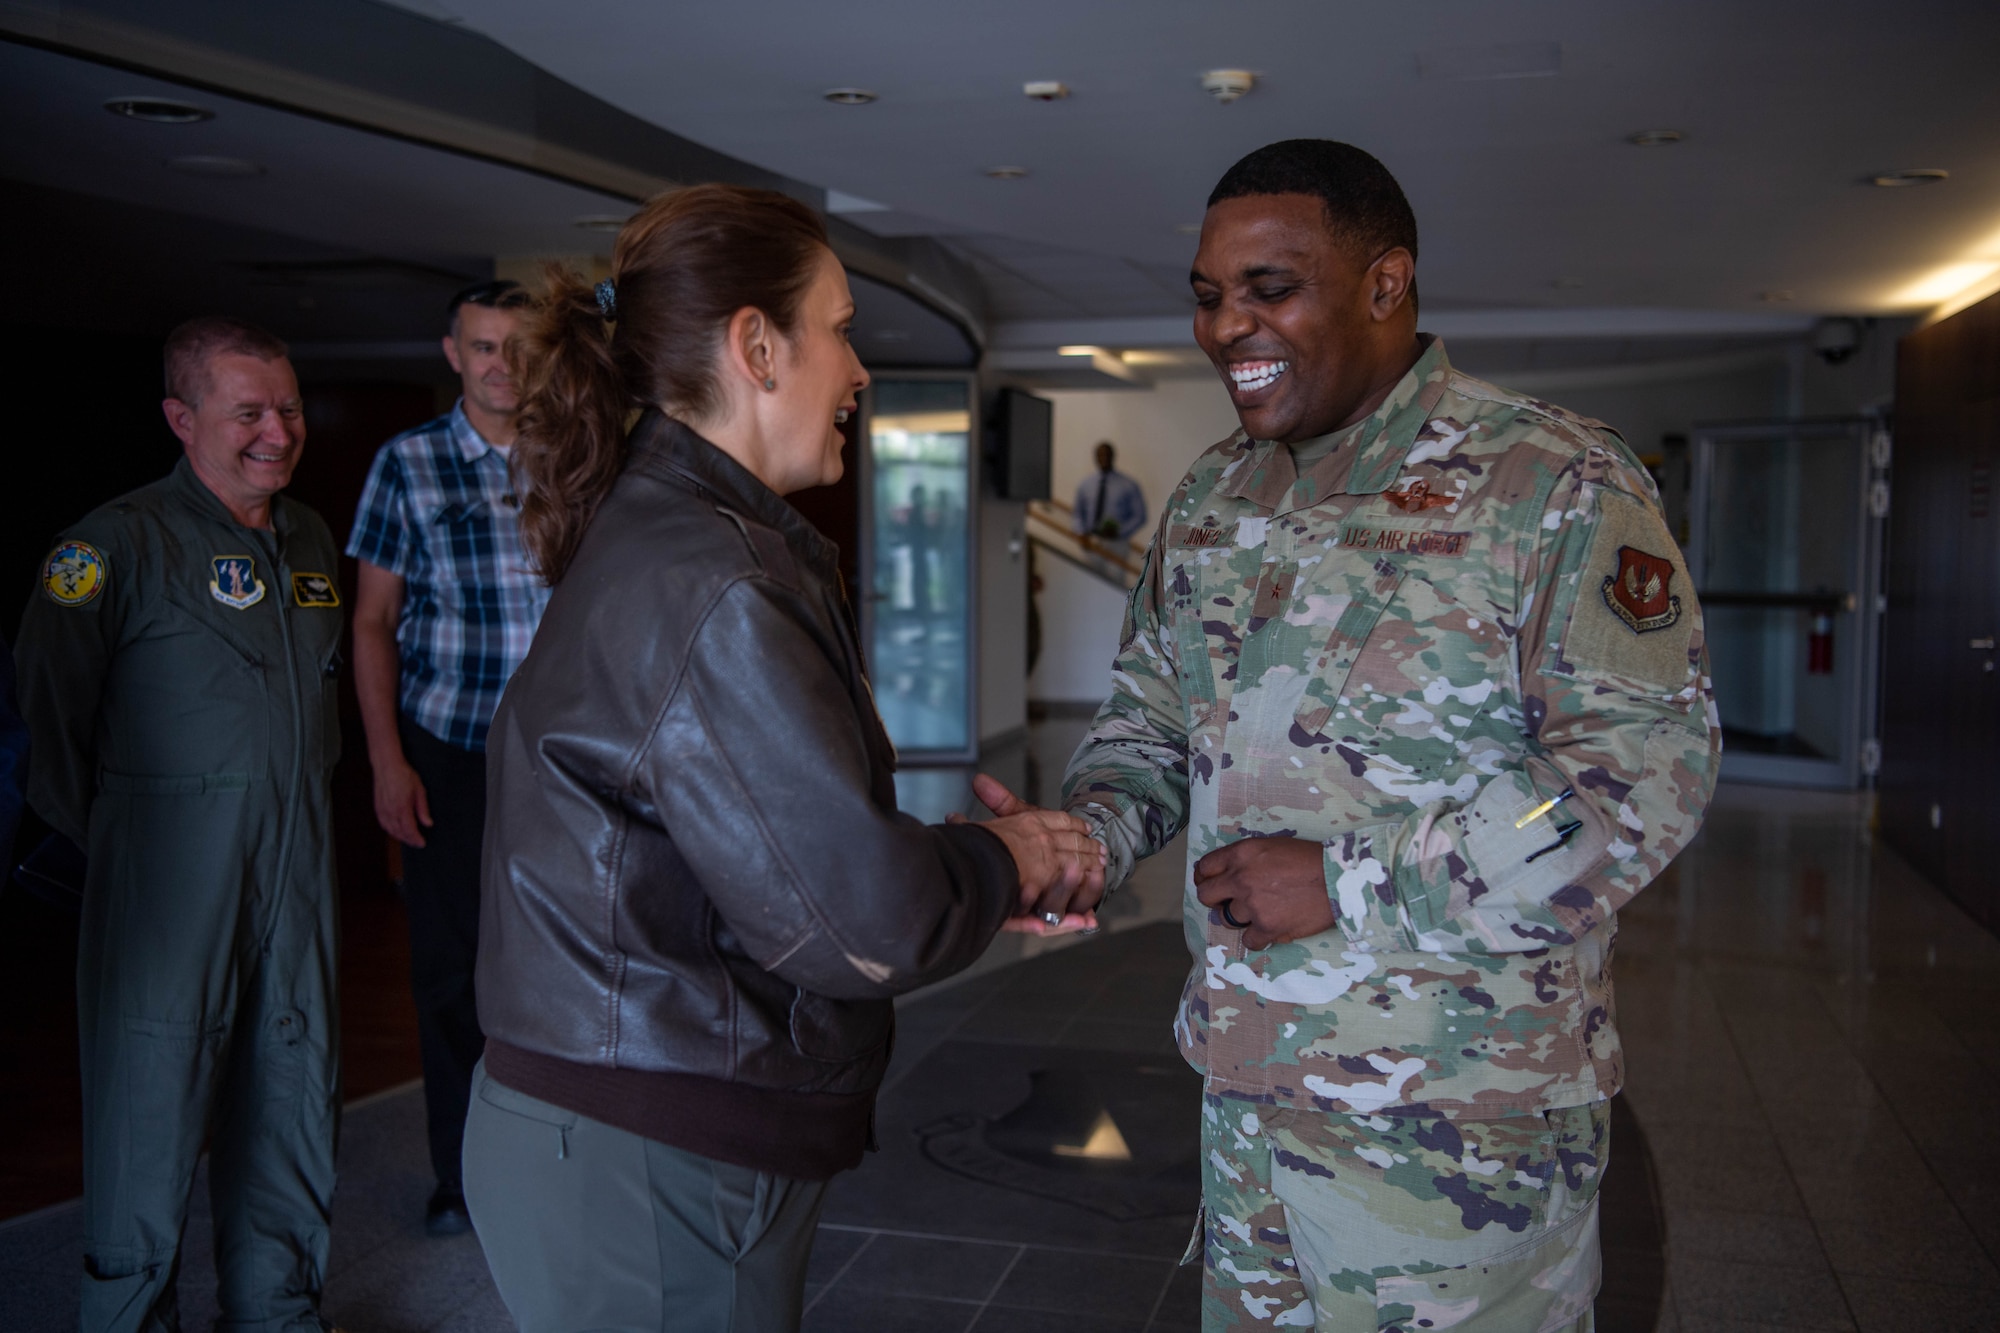 U.S. Air Force Brig. Gen. Ottis C. Jones, 86th Airlift Wing commander, right, and Michigan Gov. Gretchen Whitmer, left, exchange coins during a visit at Ramstein Air Base, Germany, June 22, 2023.